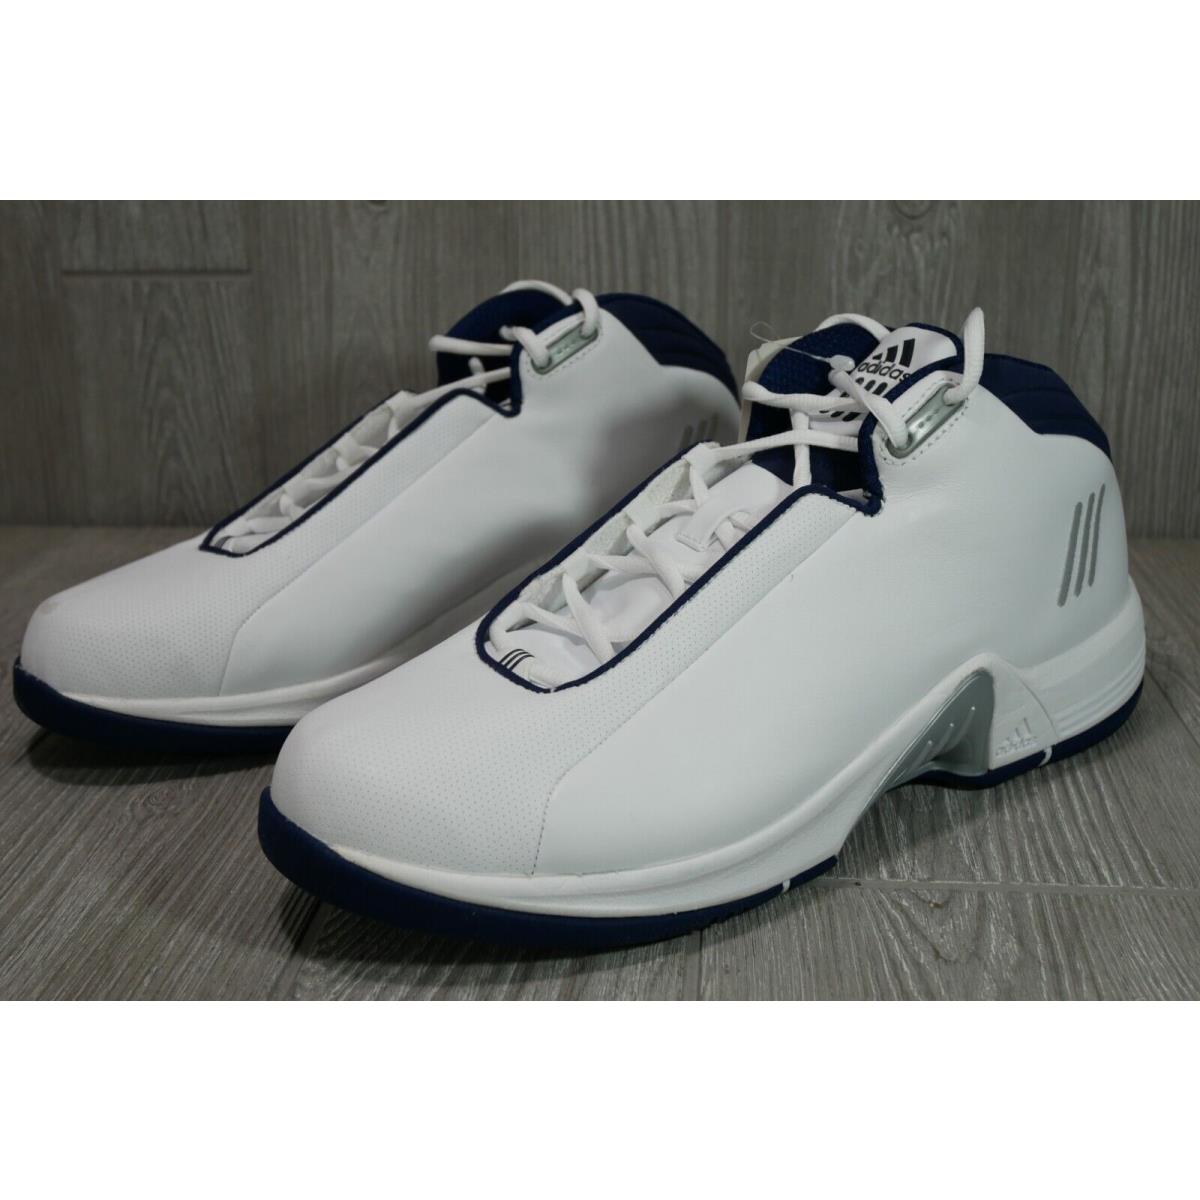 Vintage Adidas Ultra Tunnel 2004 Basketball Shoes Mens SZ 9 11 12 13 Oss |  692740525631 - Adidas shoes - White | SporTipTop